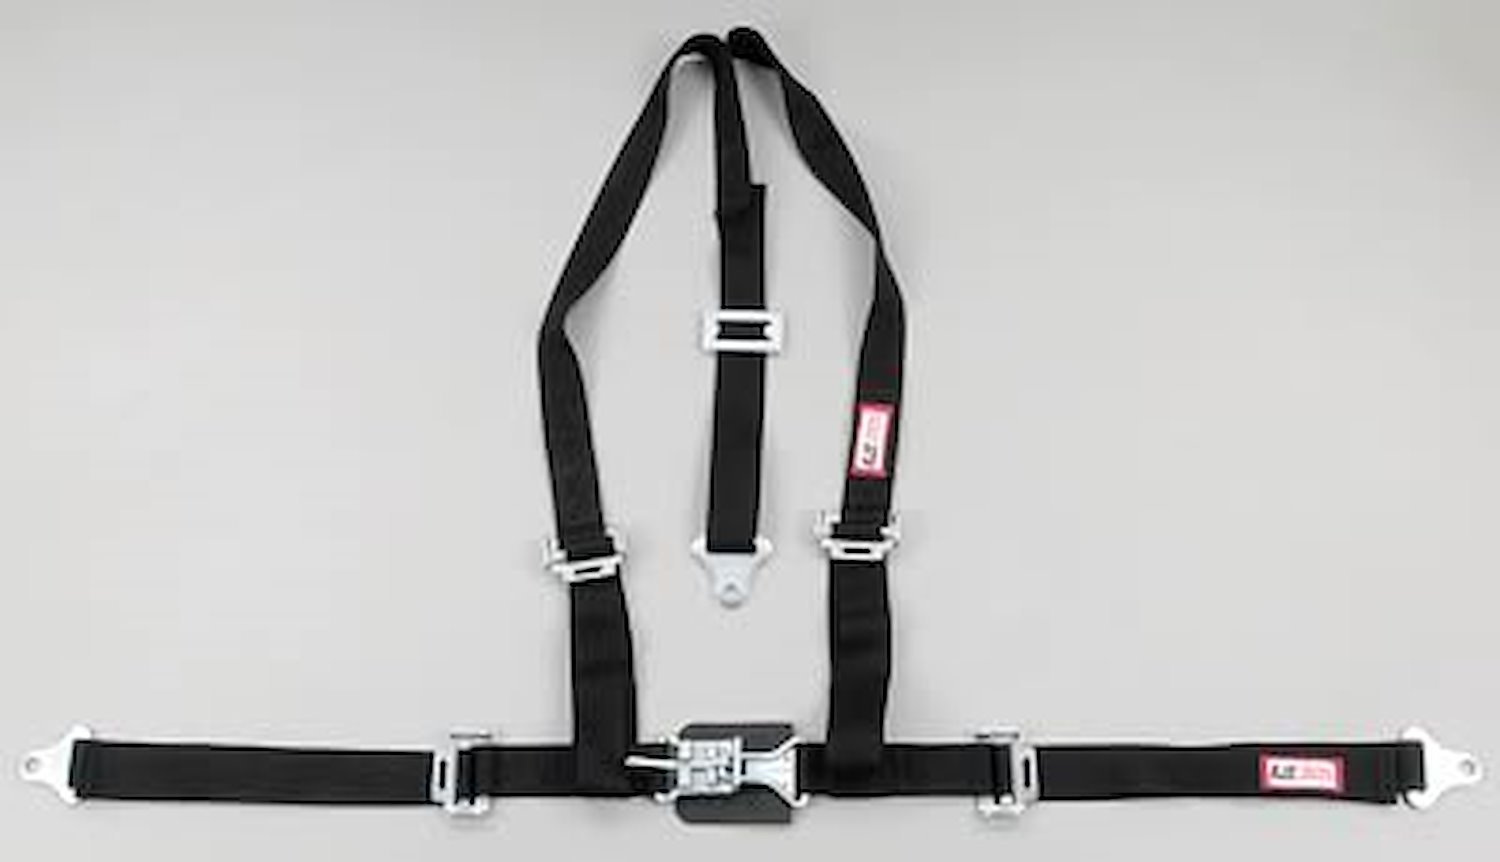 NON-SFI L&L HARNESS 2 PULL DOWN Lap Belt w/Adjuster SNAP 2 S.H. Individual FLOOR MOUNT w/STERNUM STRAP WRAP/BOLT RED